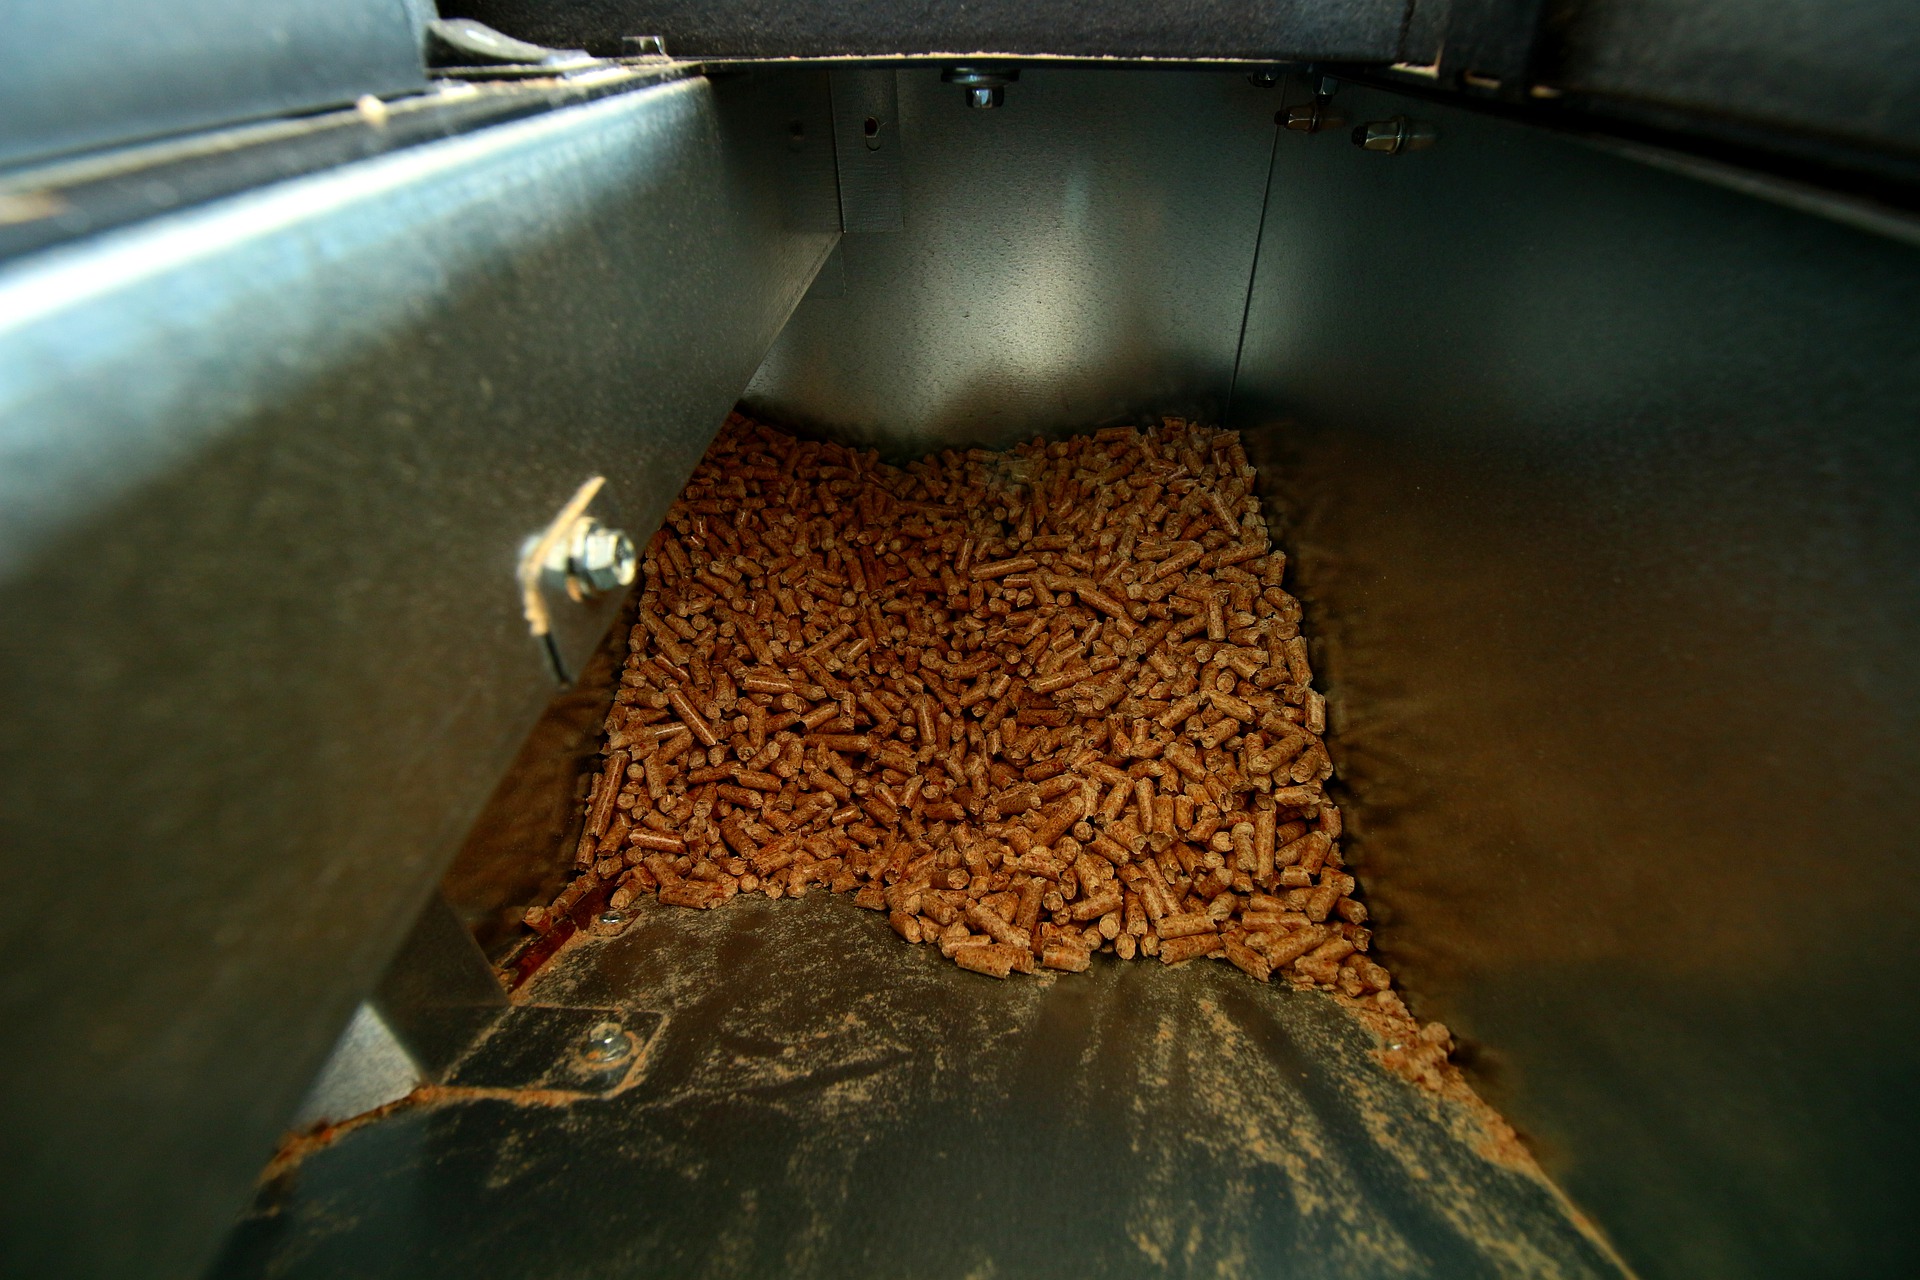 wood pellets in a holding tank are a fire risk